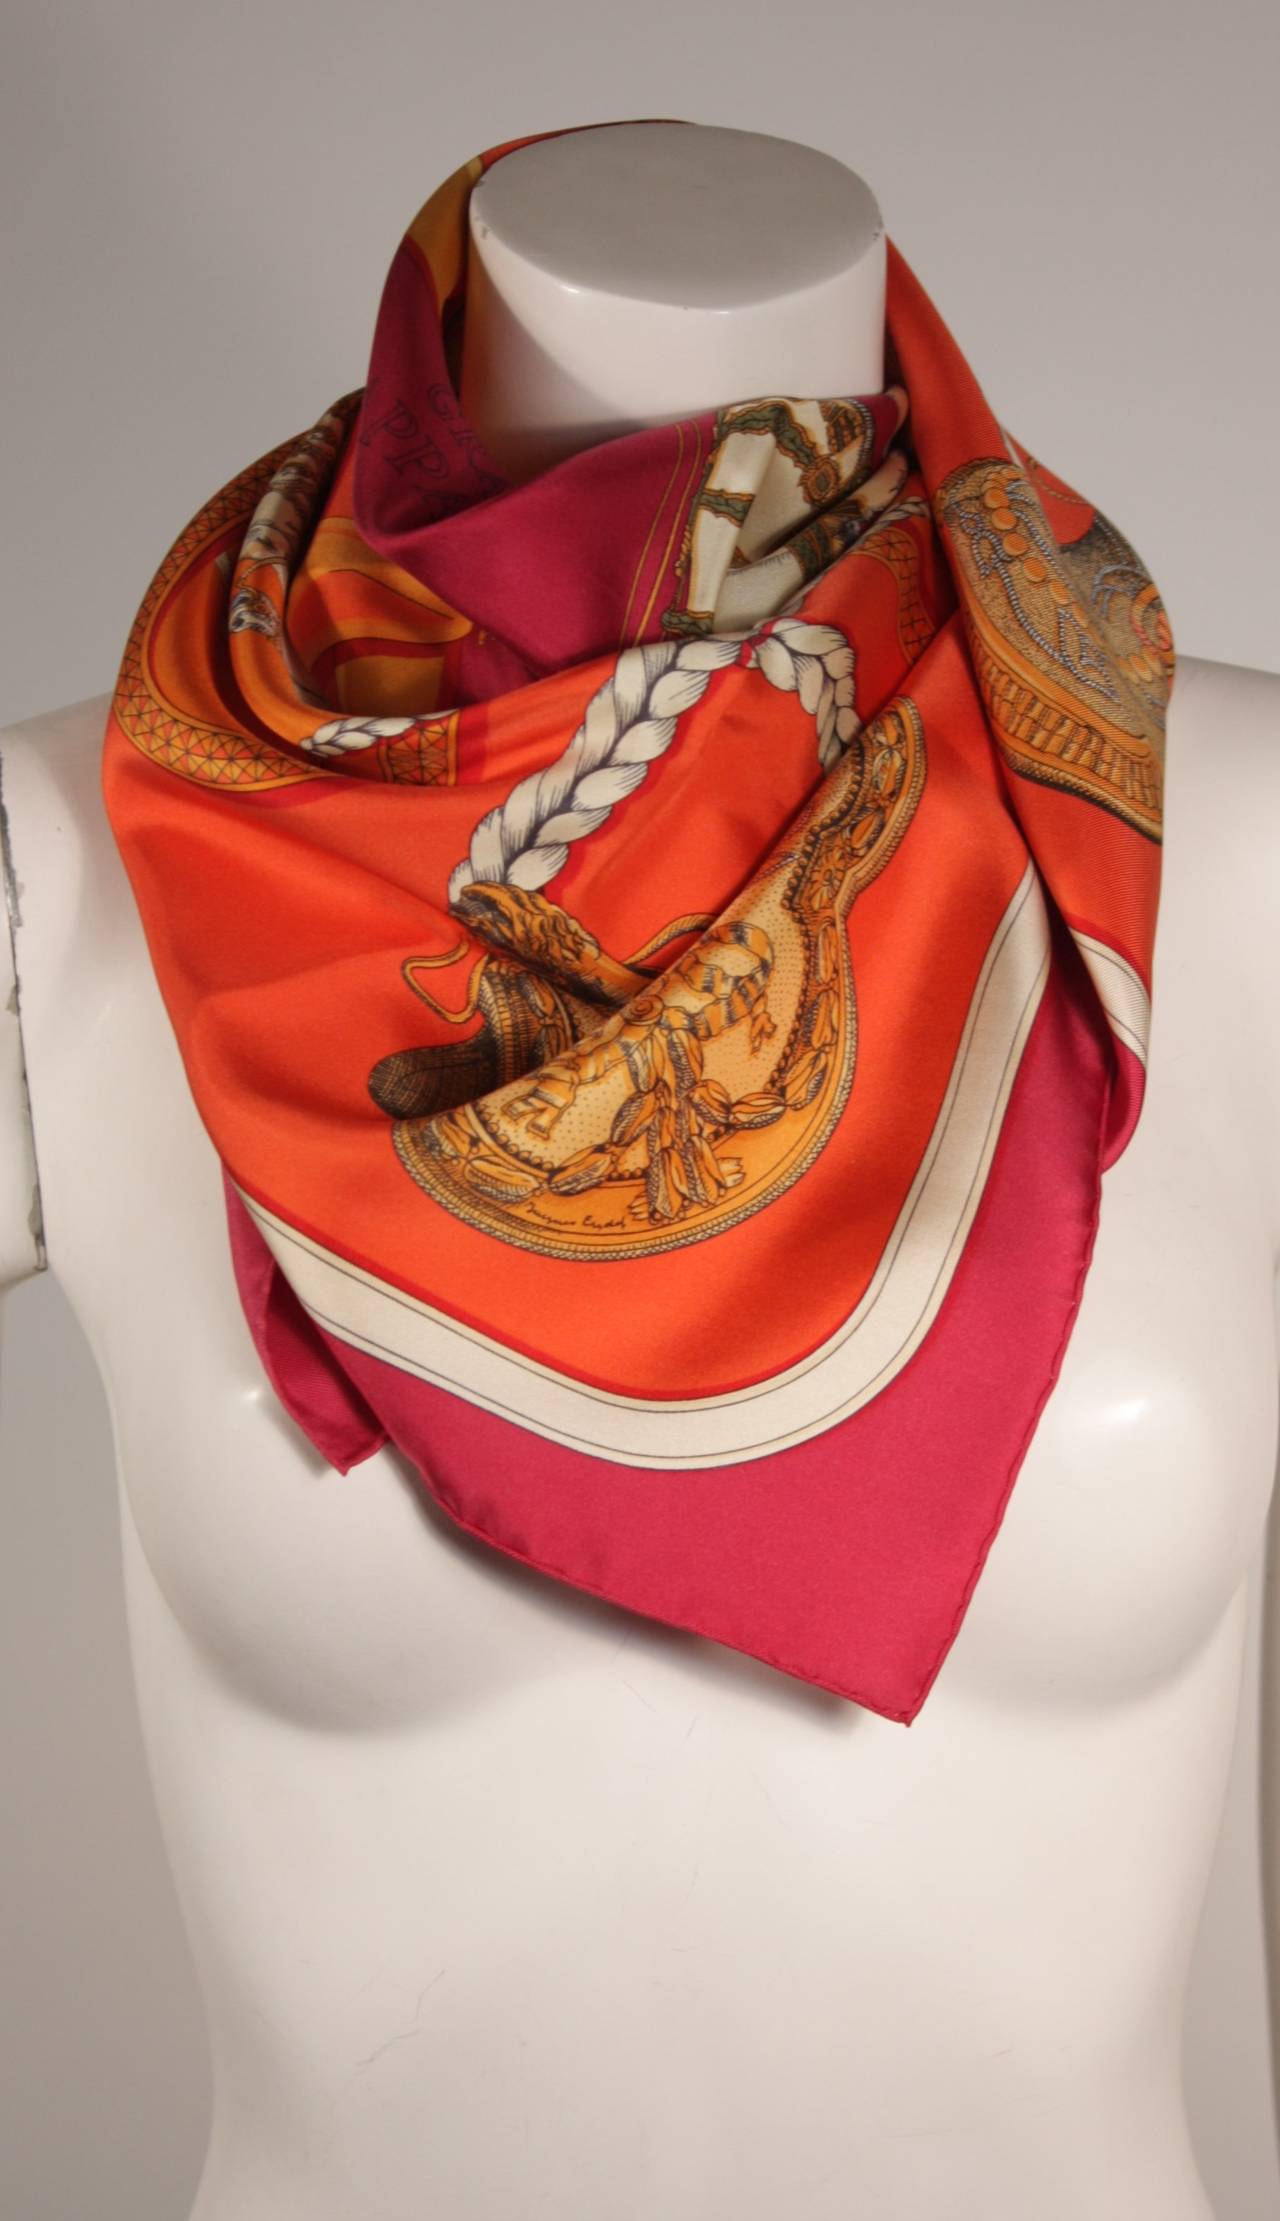 This is a lovely Hermes Grand Apparat scarf. The scarf is in excellent condition and comes with it's original boxes (Christmas gift box and Hermes' original box). The silk scarf features hand rolled edges and a striking print, with contrasting